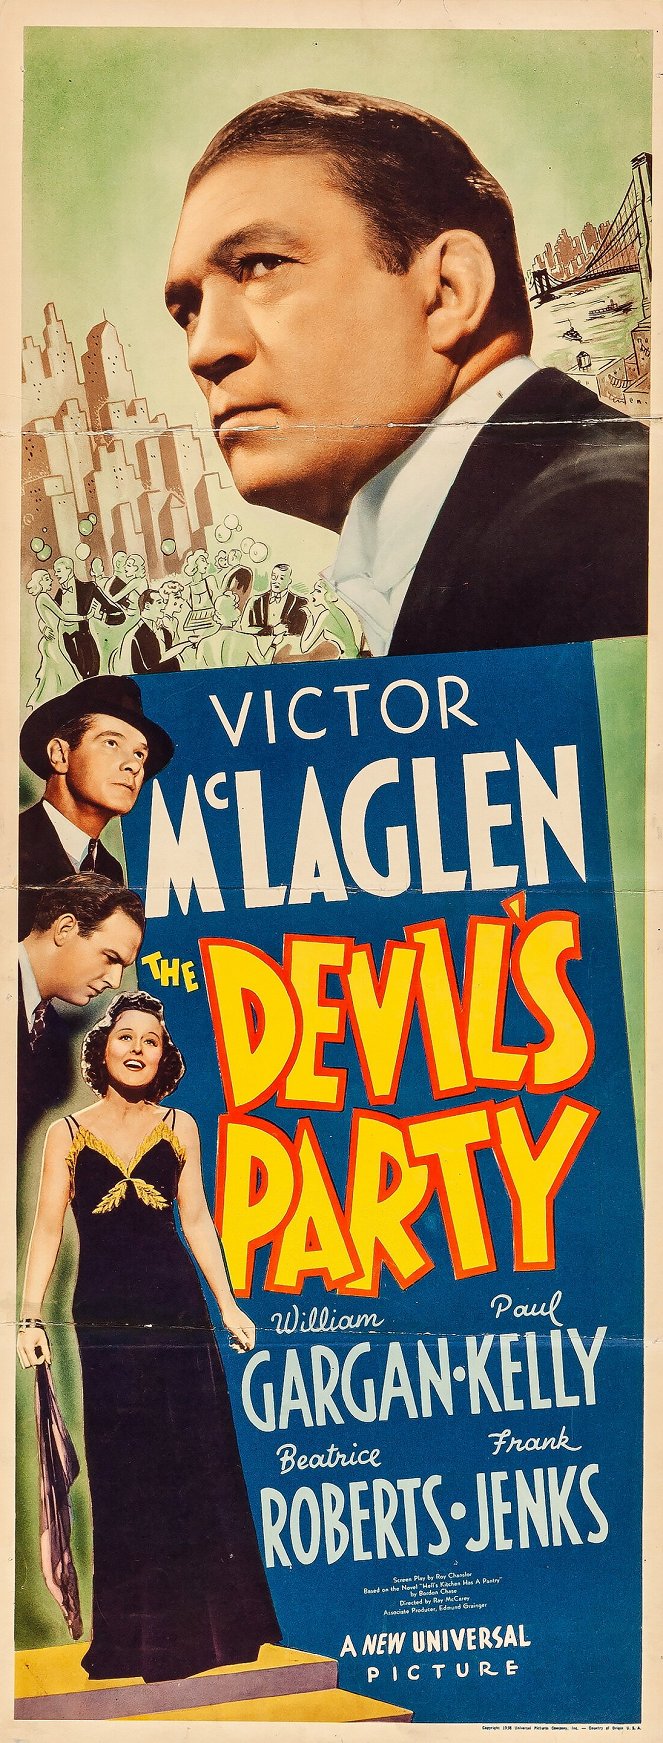 The Devil's Party - Posters